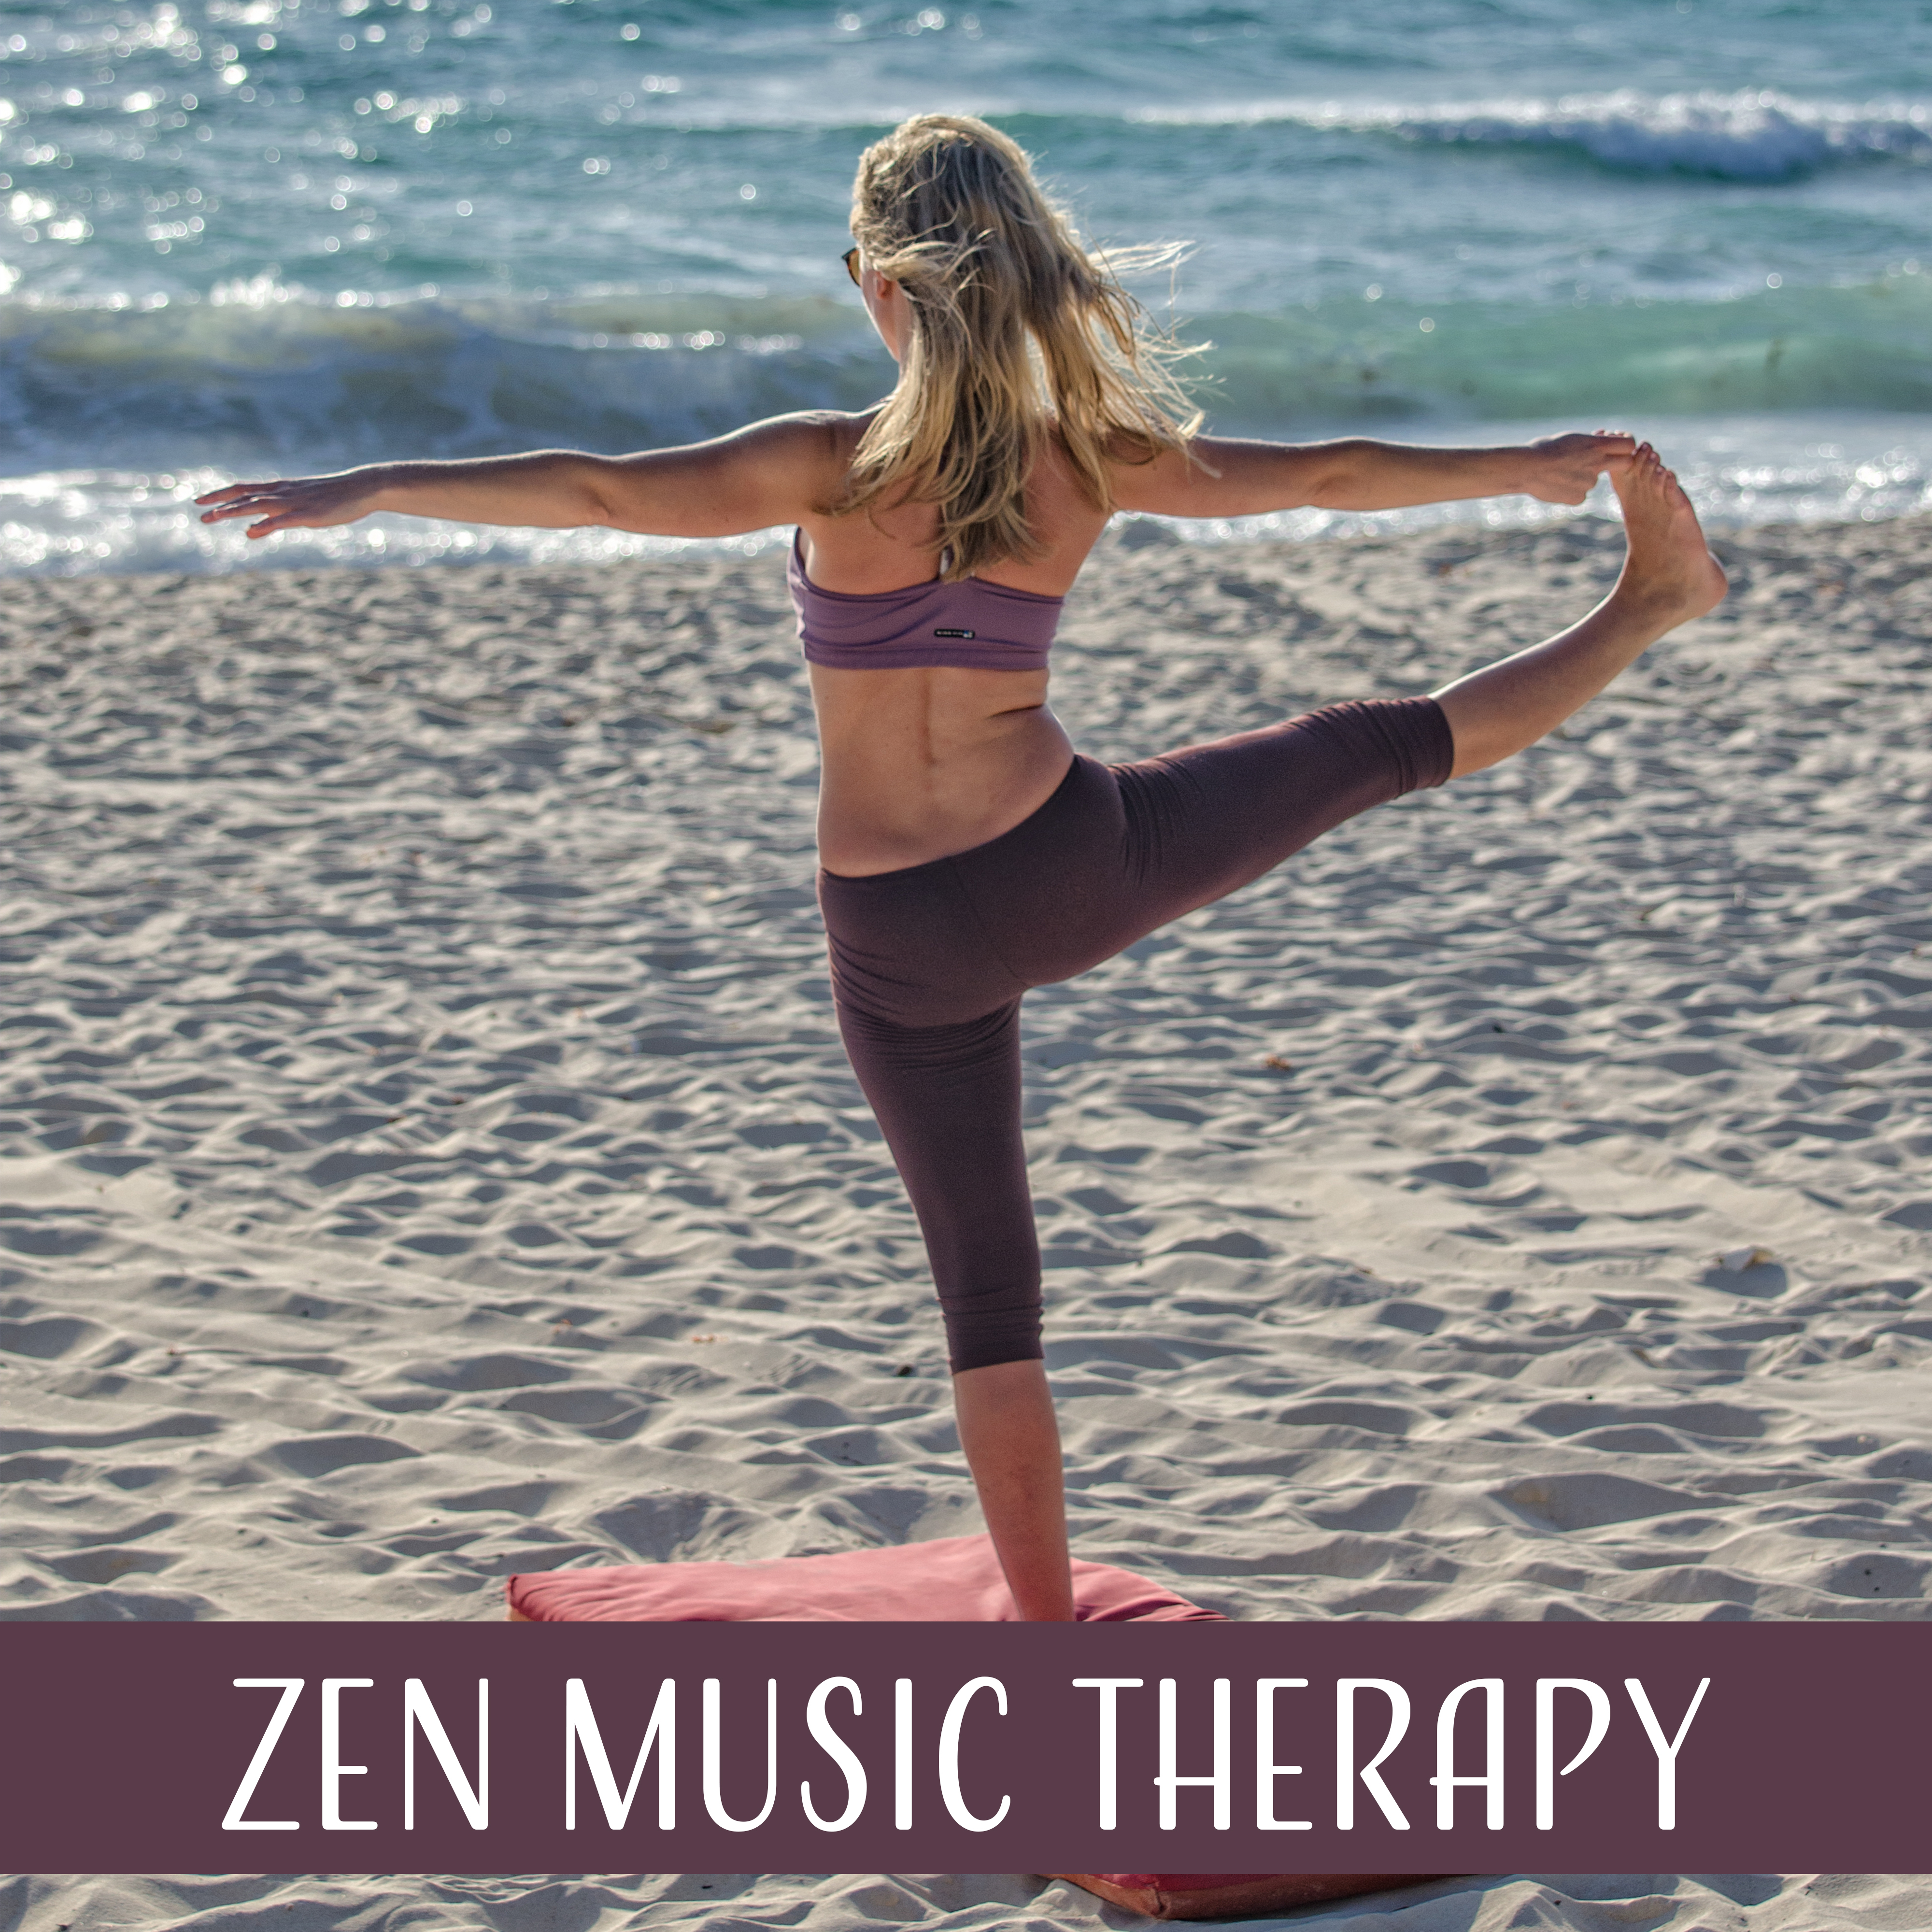 Zen Music Therapy  Finest Selected Nature Sounds, Meditation Music, Background for Yoga Practice